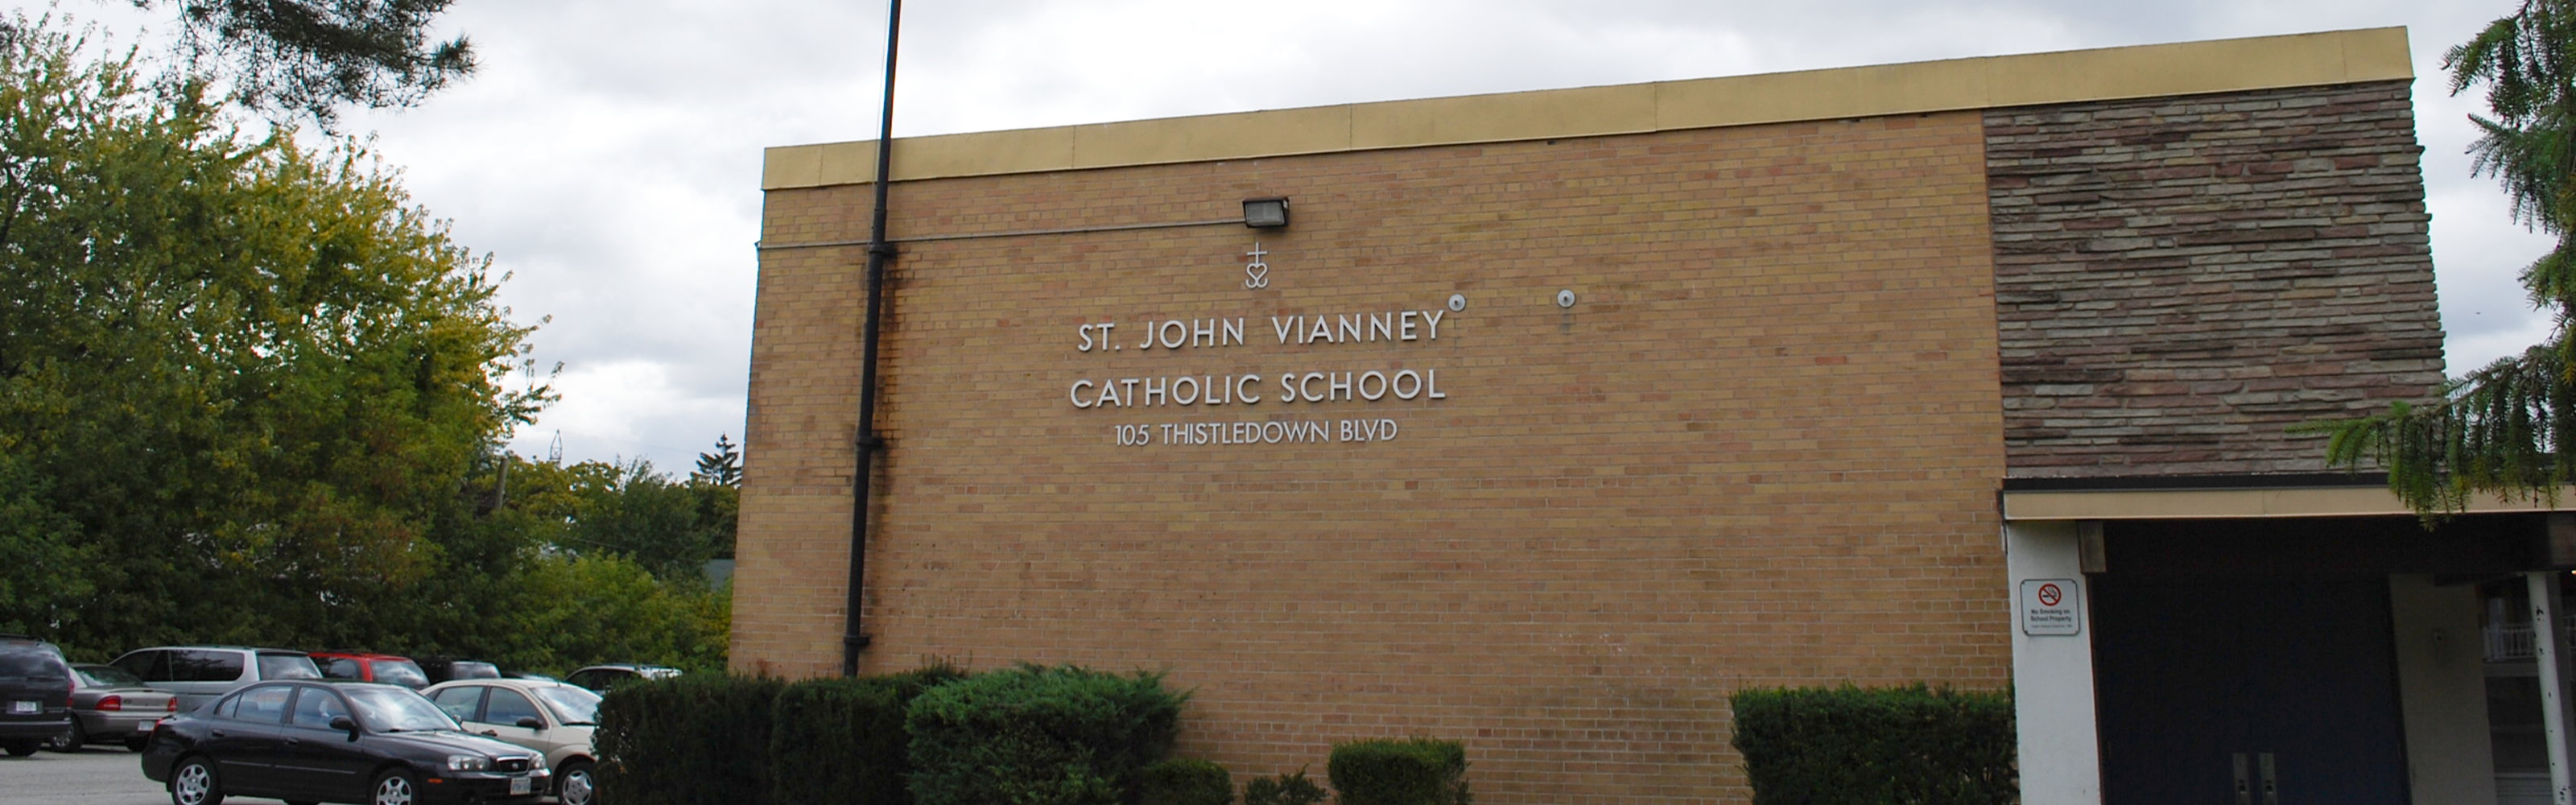 The front of the  St. John Vianney Catholic School building.